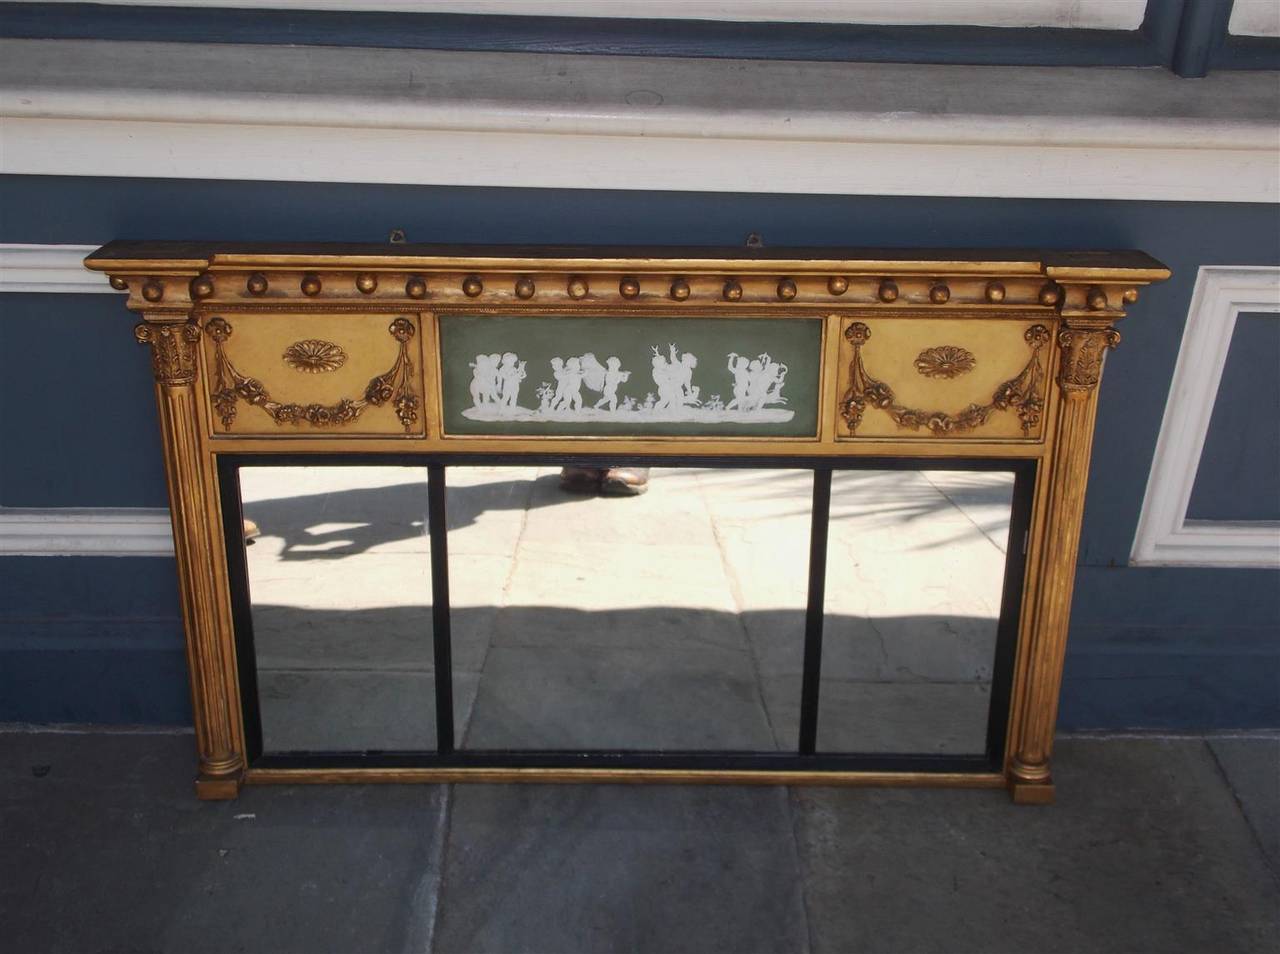 English gilt carved wood over mantel mirror with ball finials, centered jasper ware panel depicting children celebrating after a successful hunt for wild game,  flanking medallion decorative floral swags, Corinthian side columns, and reeded ebonized